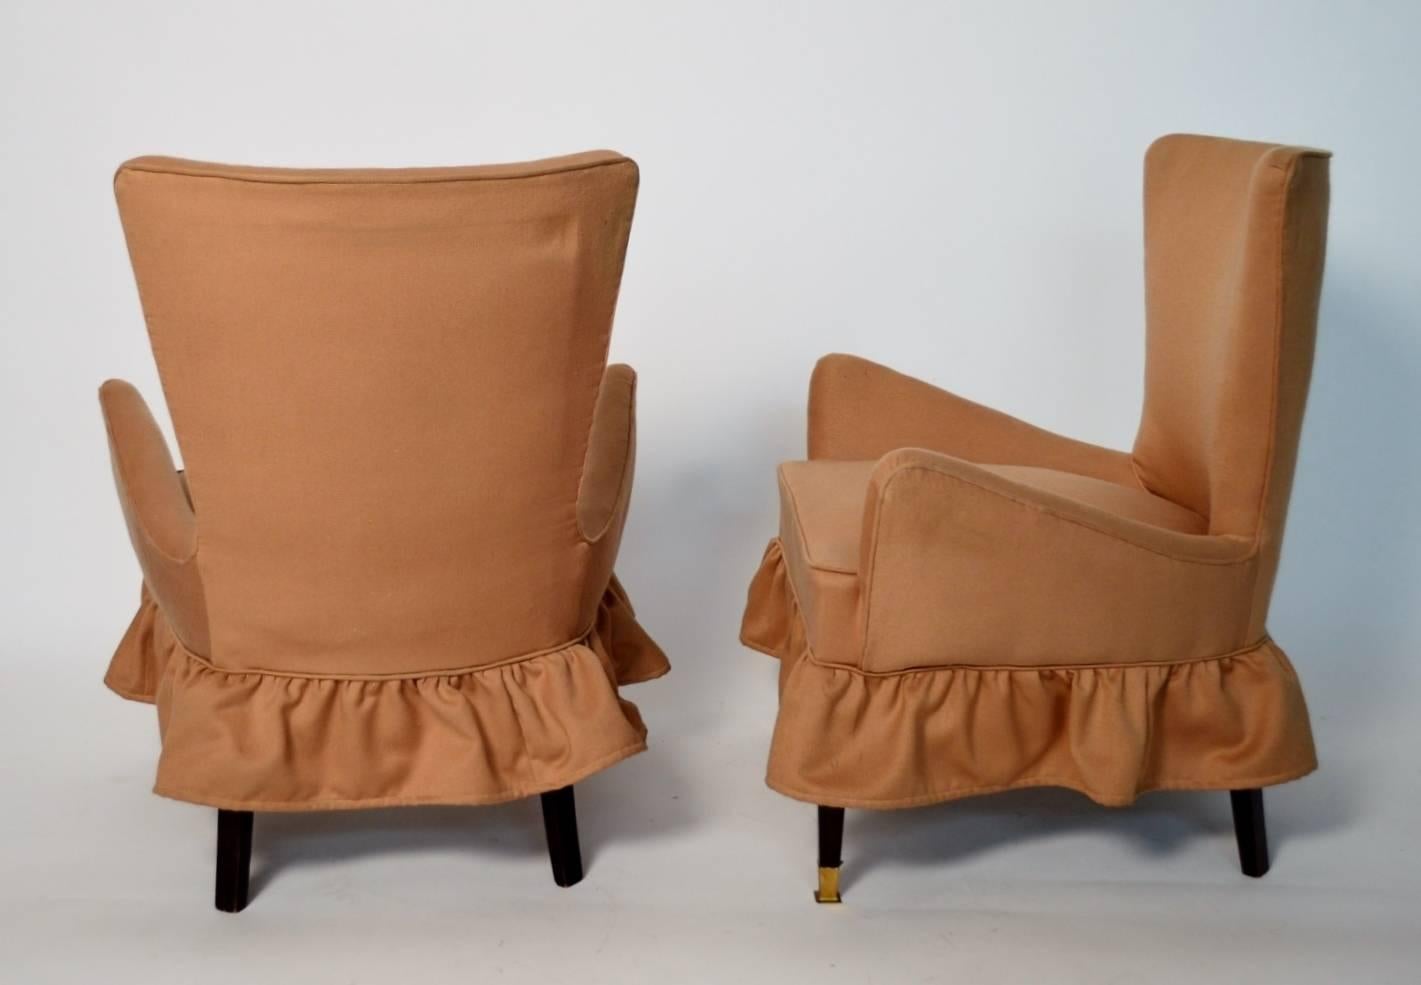 Set of two very particular and feminine Italian small armchairs or slipper chairs with square mahogany feet and brass details, in very good original condition.
Usually this form and size of chairs have been used in the bedroom and served as clothes